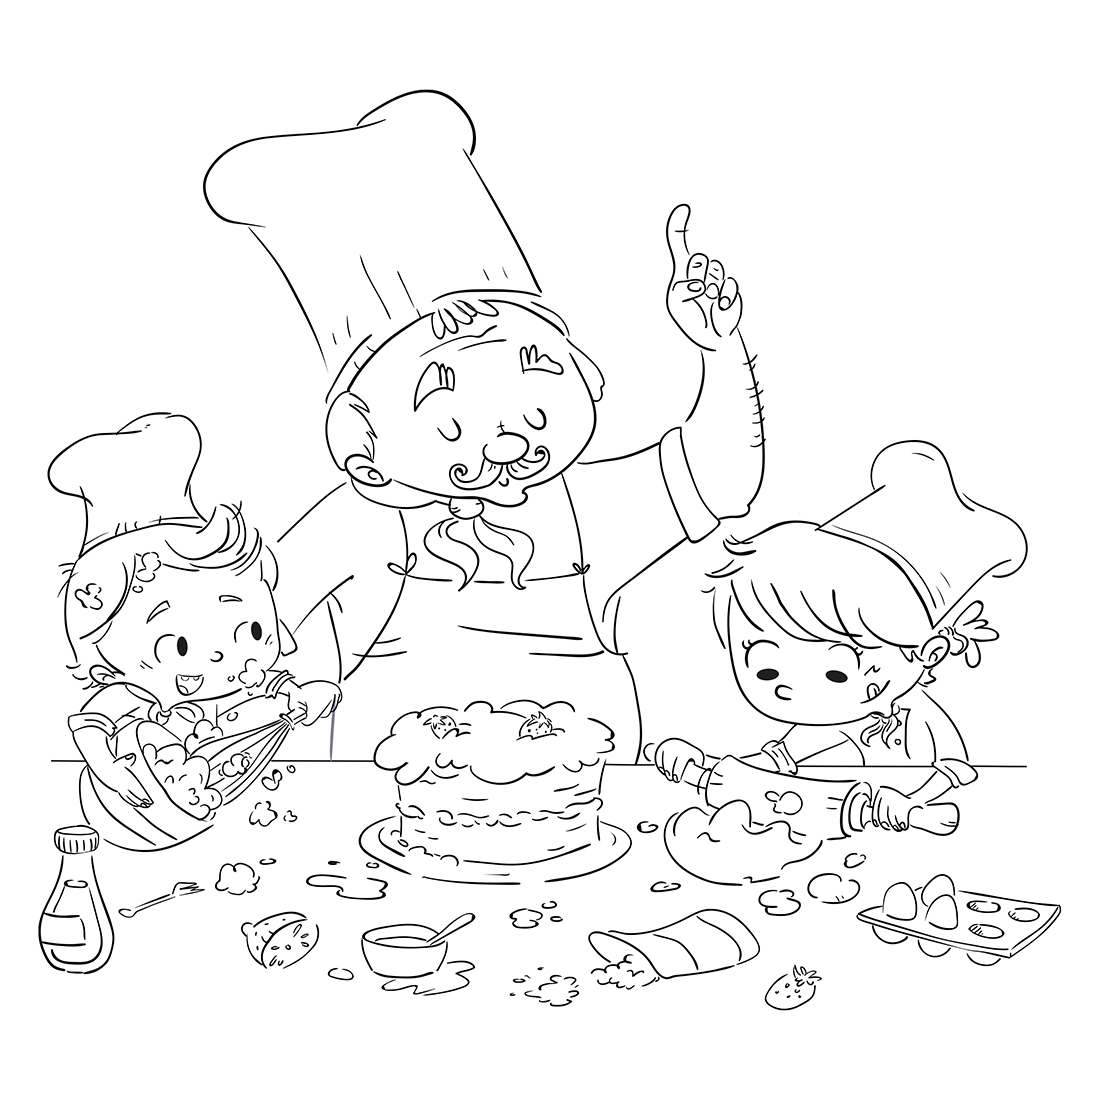 Children and a cook making a recipe in the kitchen. Coloring page -  Dibustock, Ilustraciones infantiles de Stock